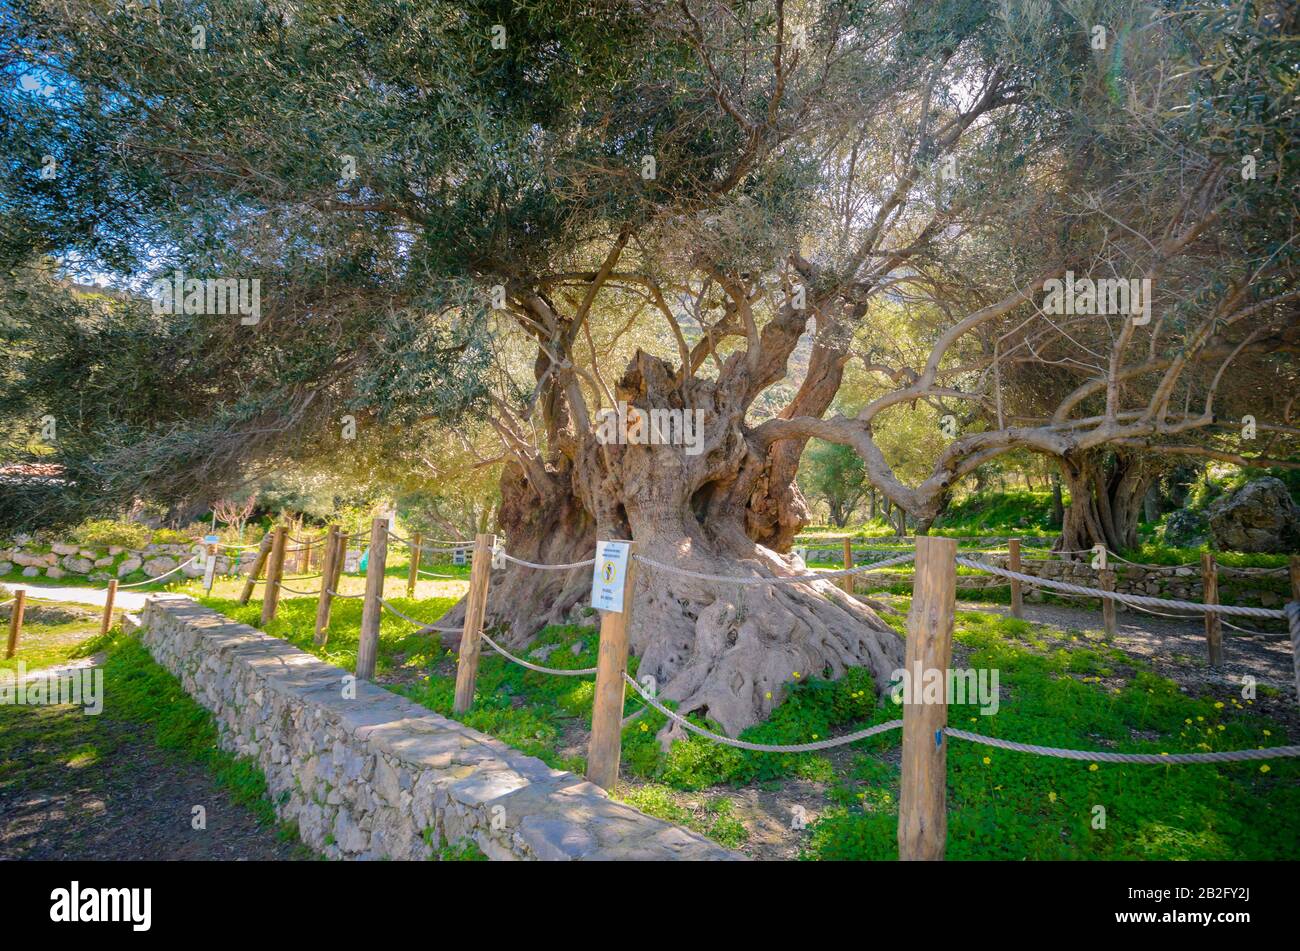 Monumental olive tree in Kavusi.It is a natural monument which is considered to be the oldest olive tree in the world with an age of 3500 years old. Stock Photo